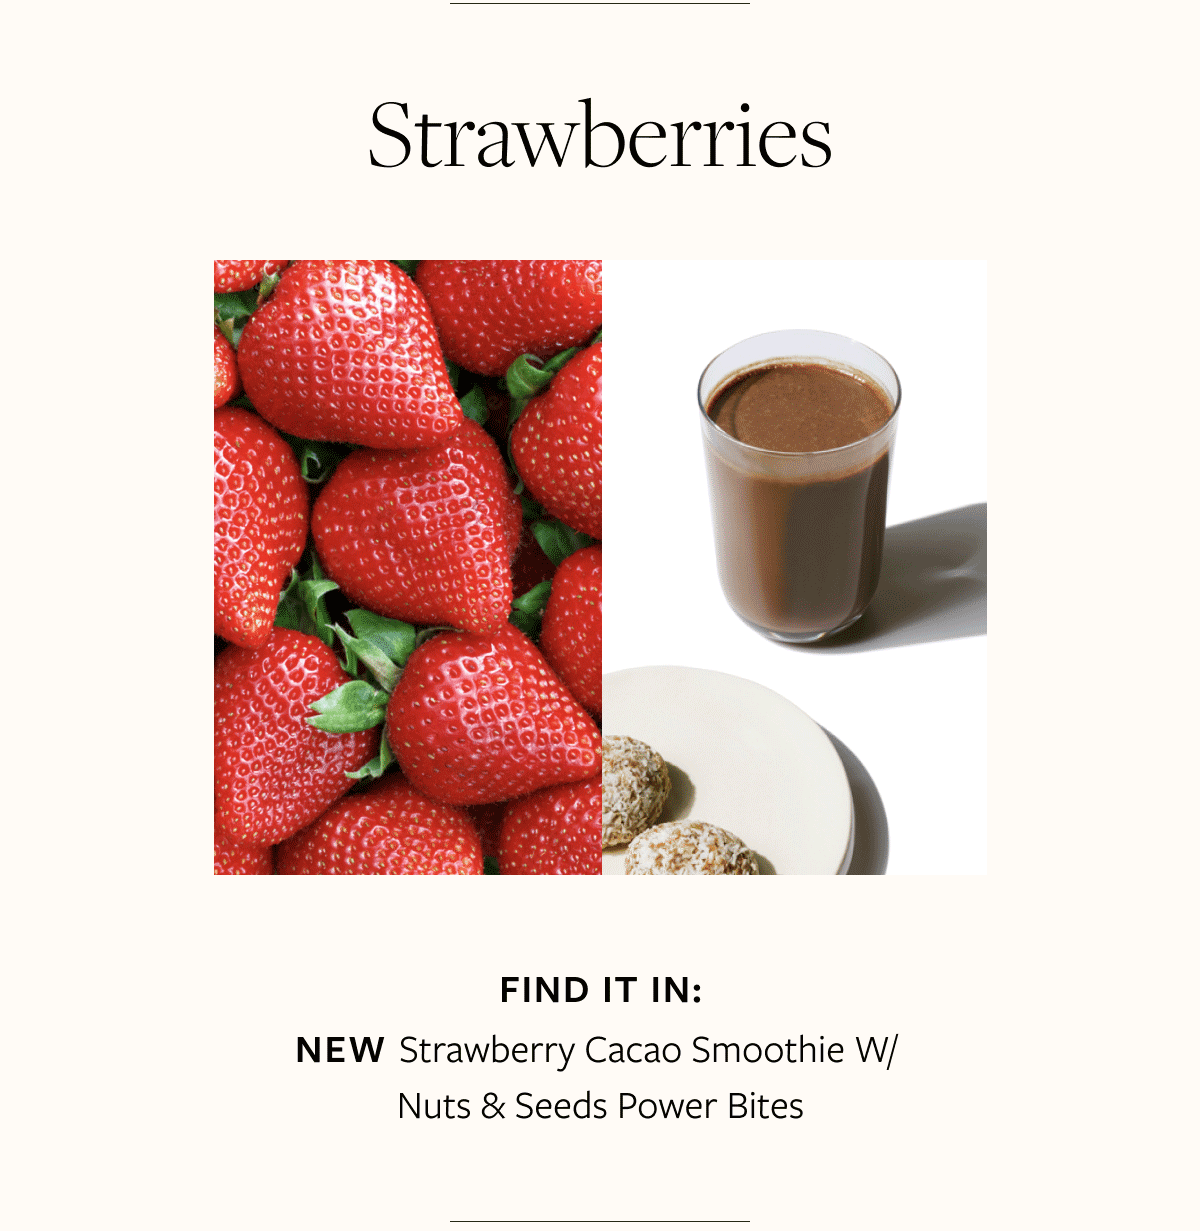 NEW Strawberry Cacao Smoothie w/ Nuts & Seeds Power Bites